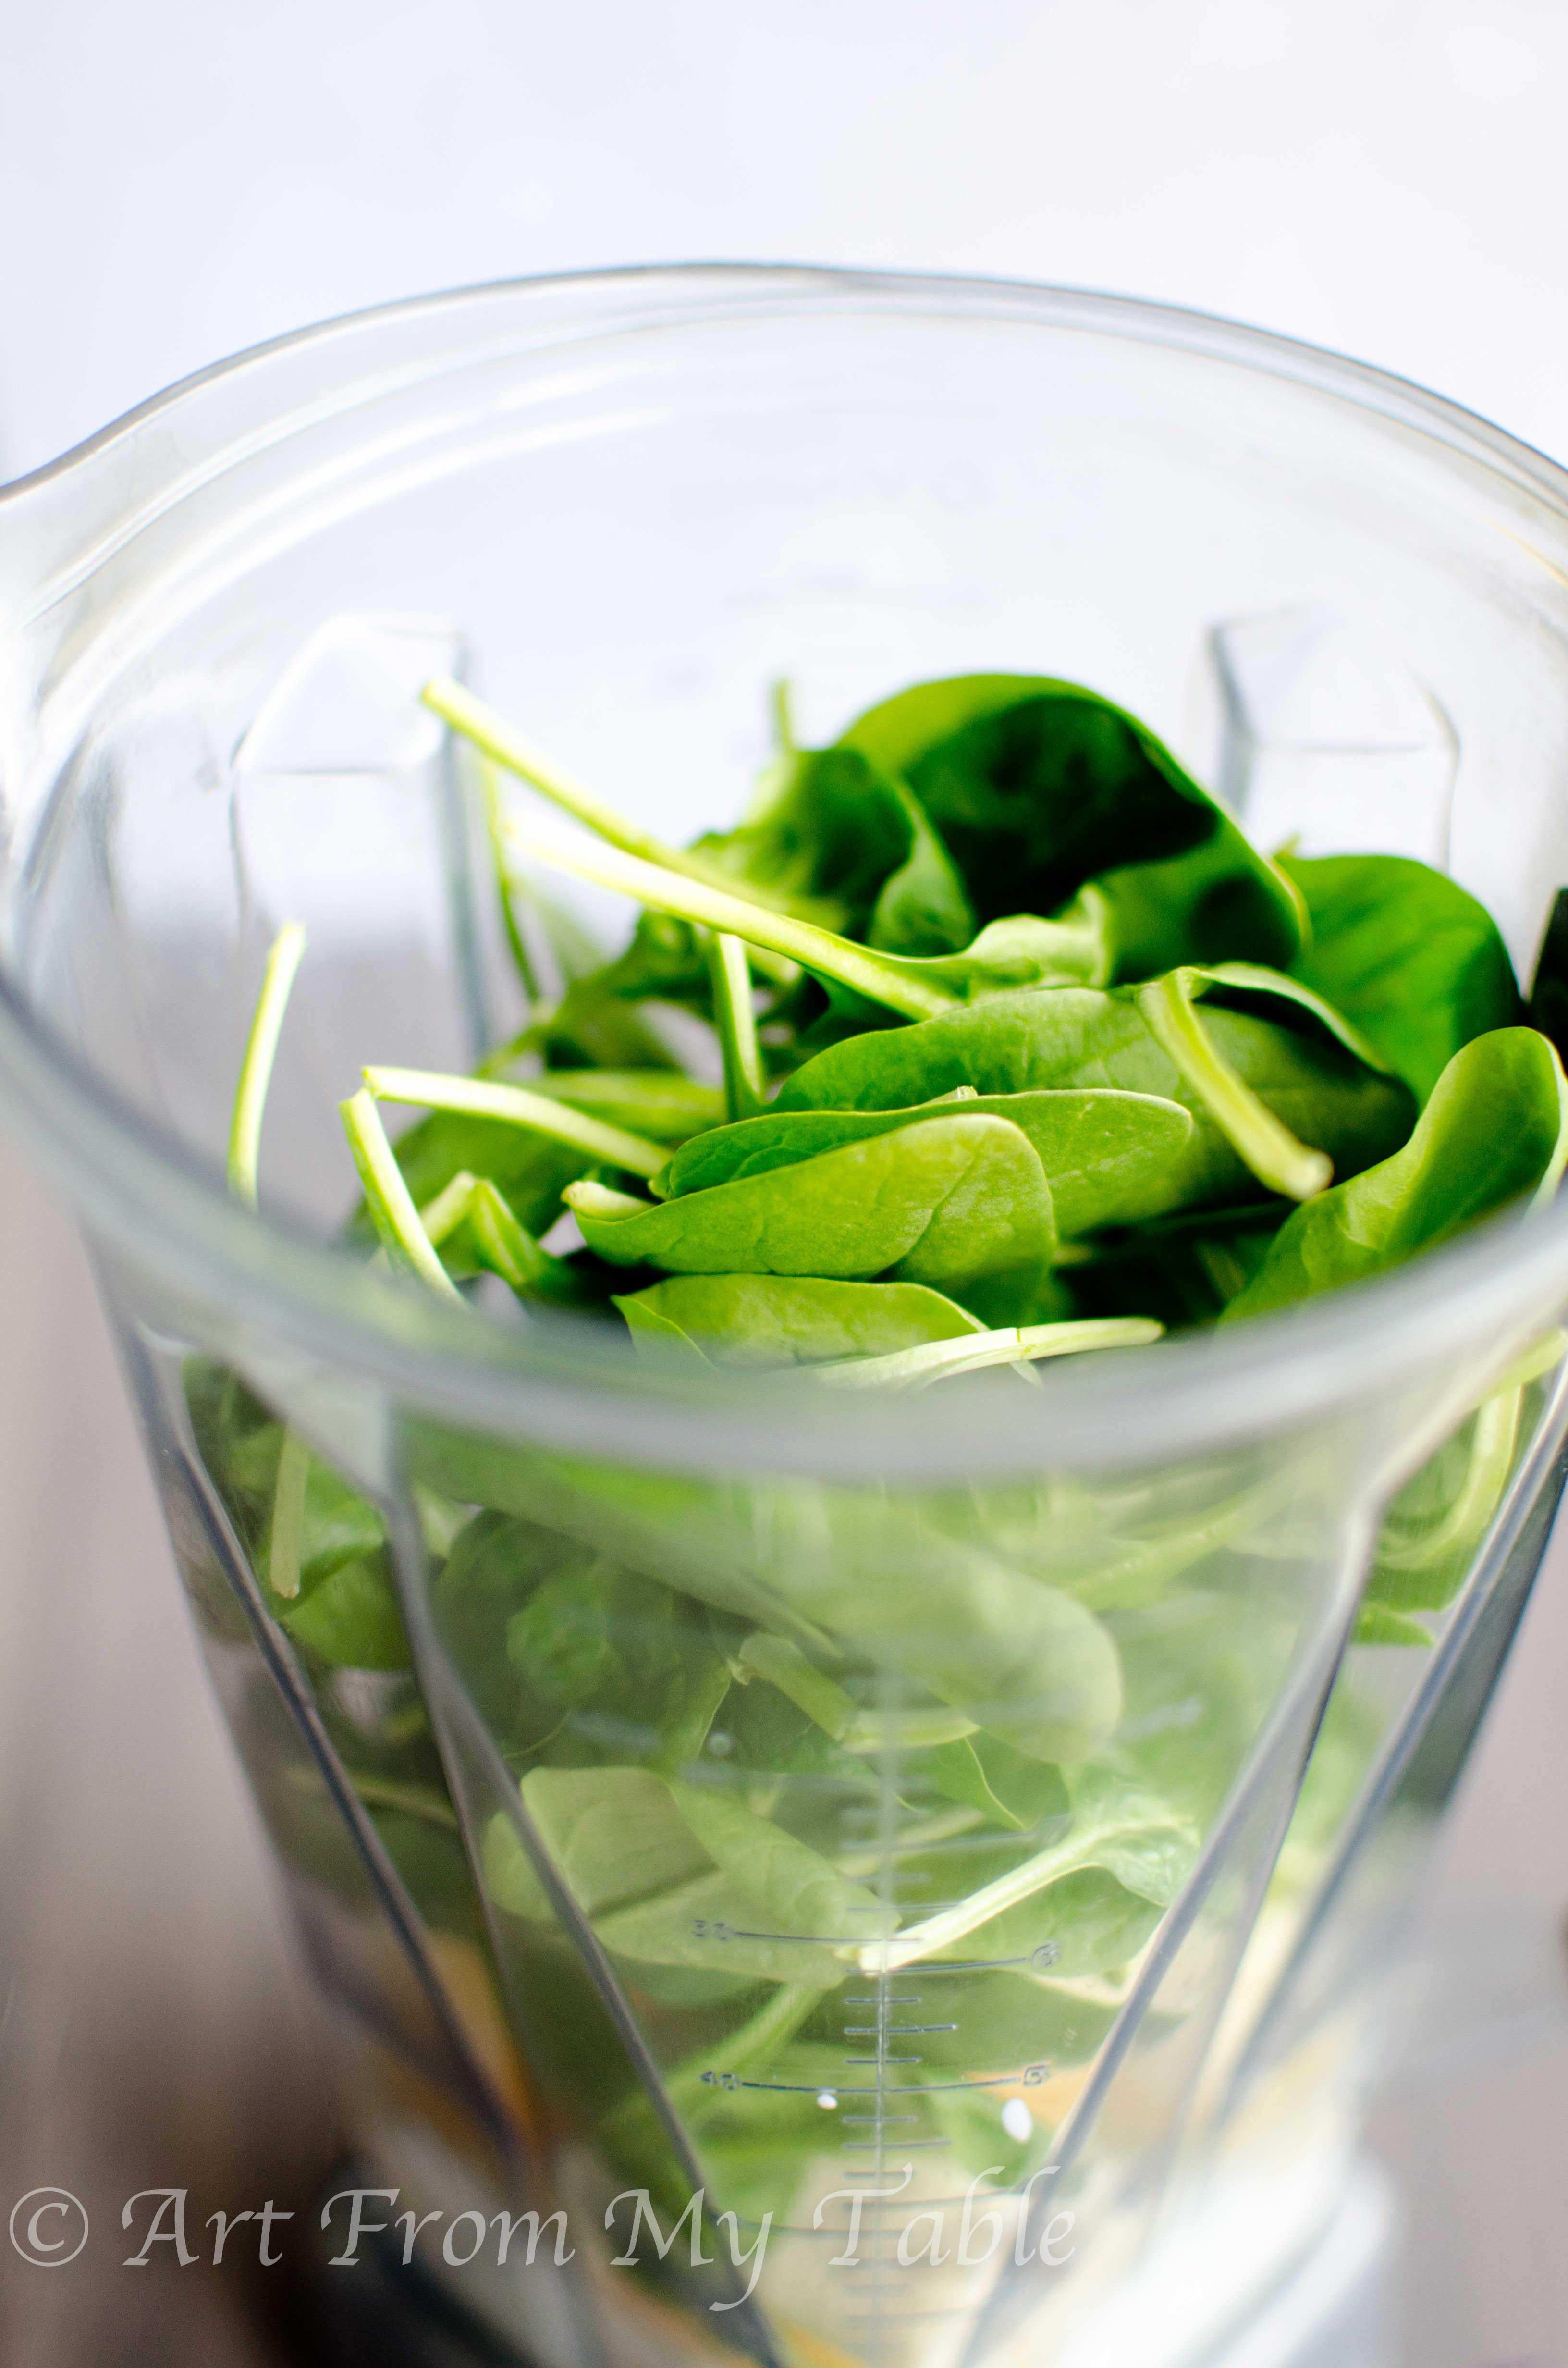 blender full of spinach leaves, banana, yogurt and other smoothie ingredients.